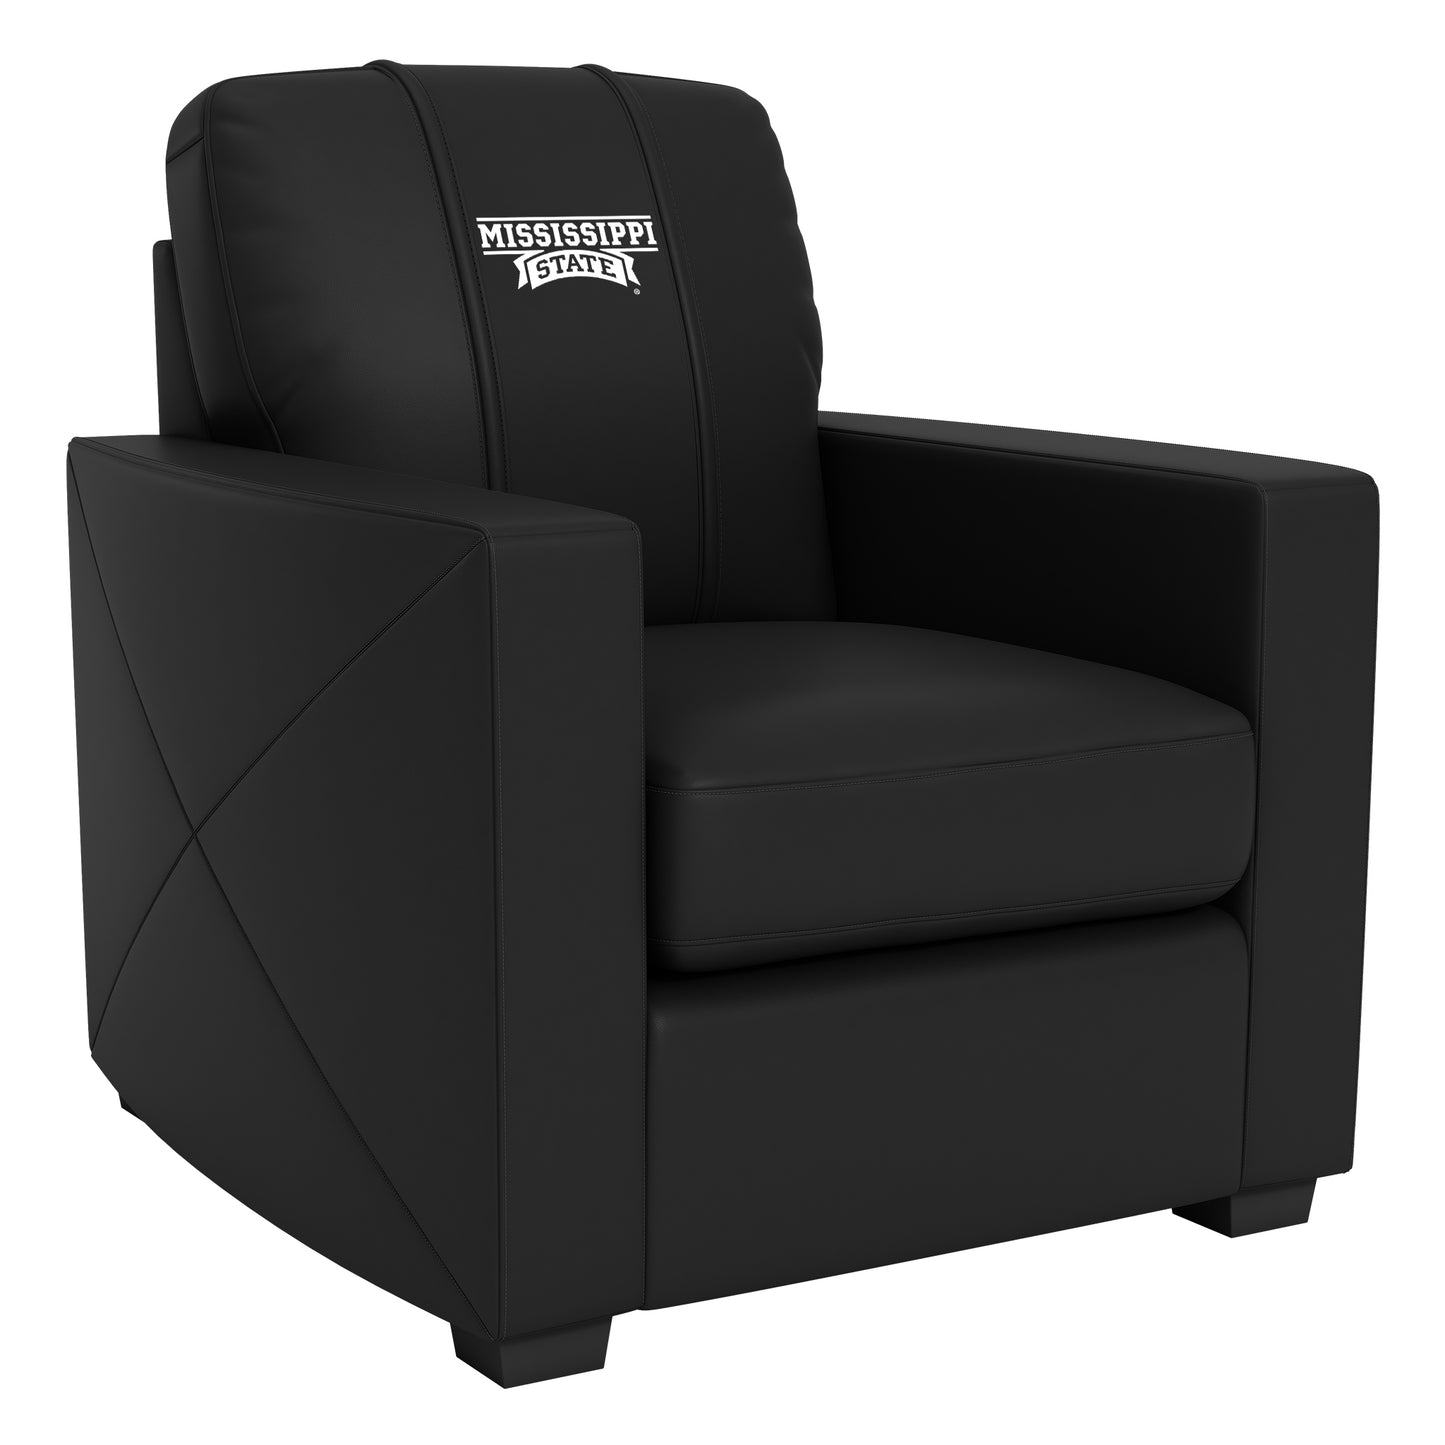 Silver Club Chair with Mississippi State Alternate